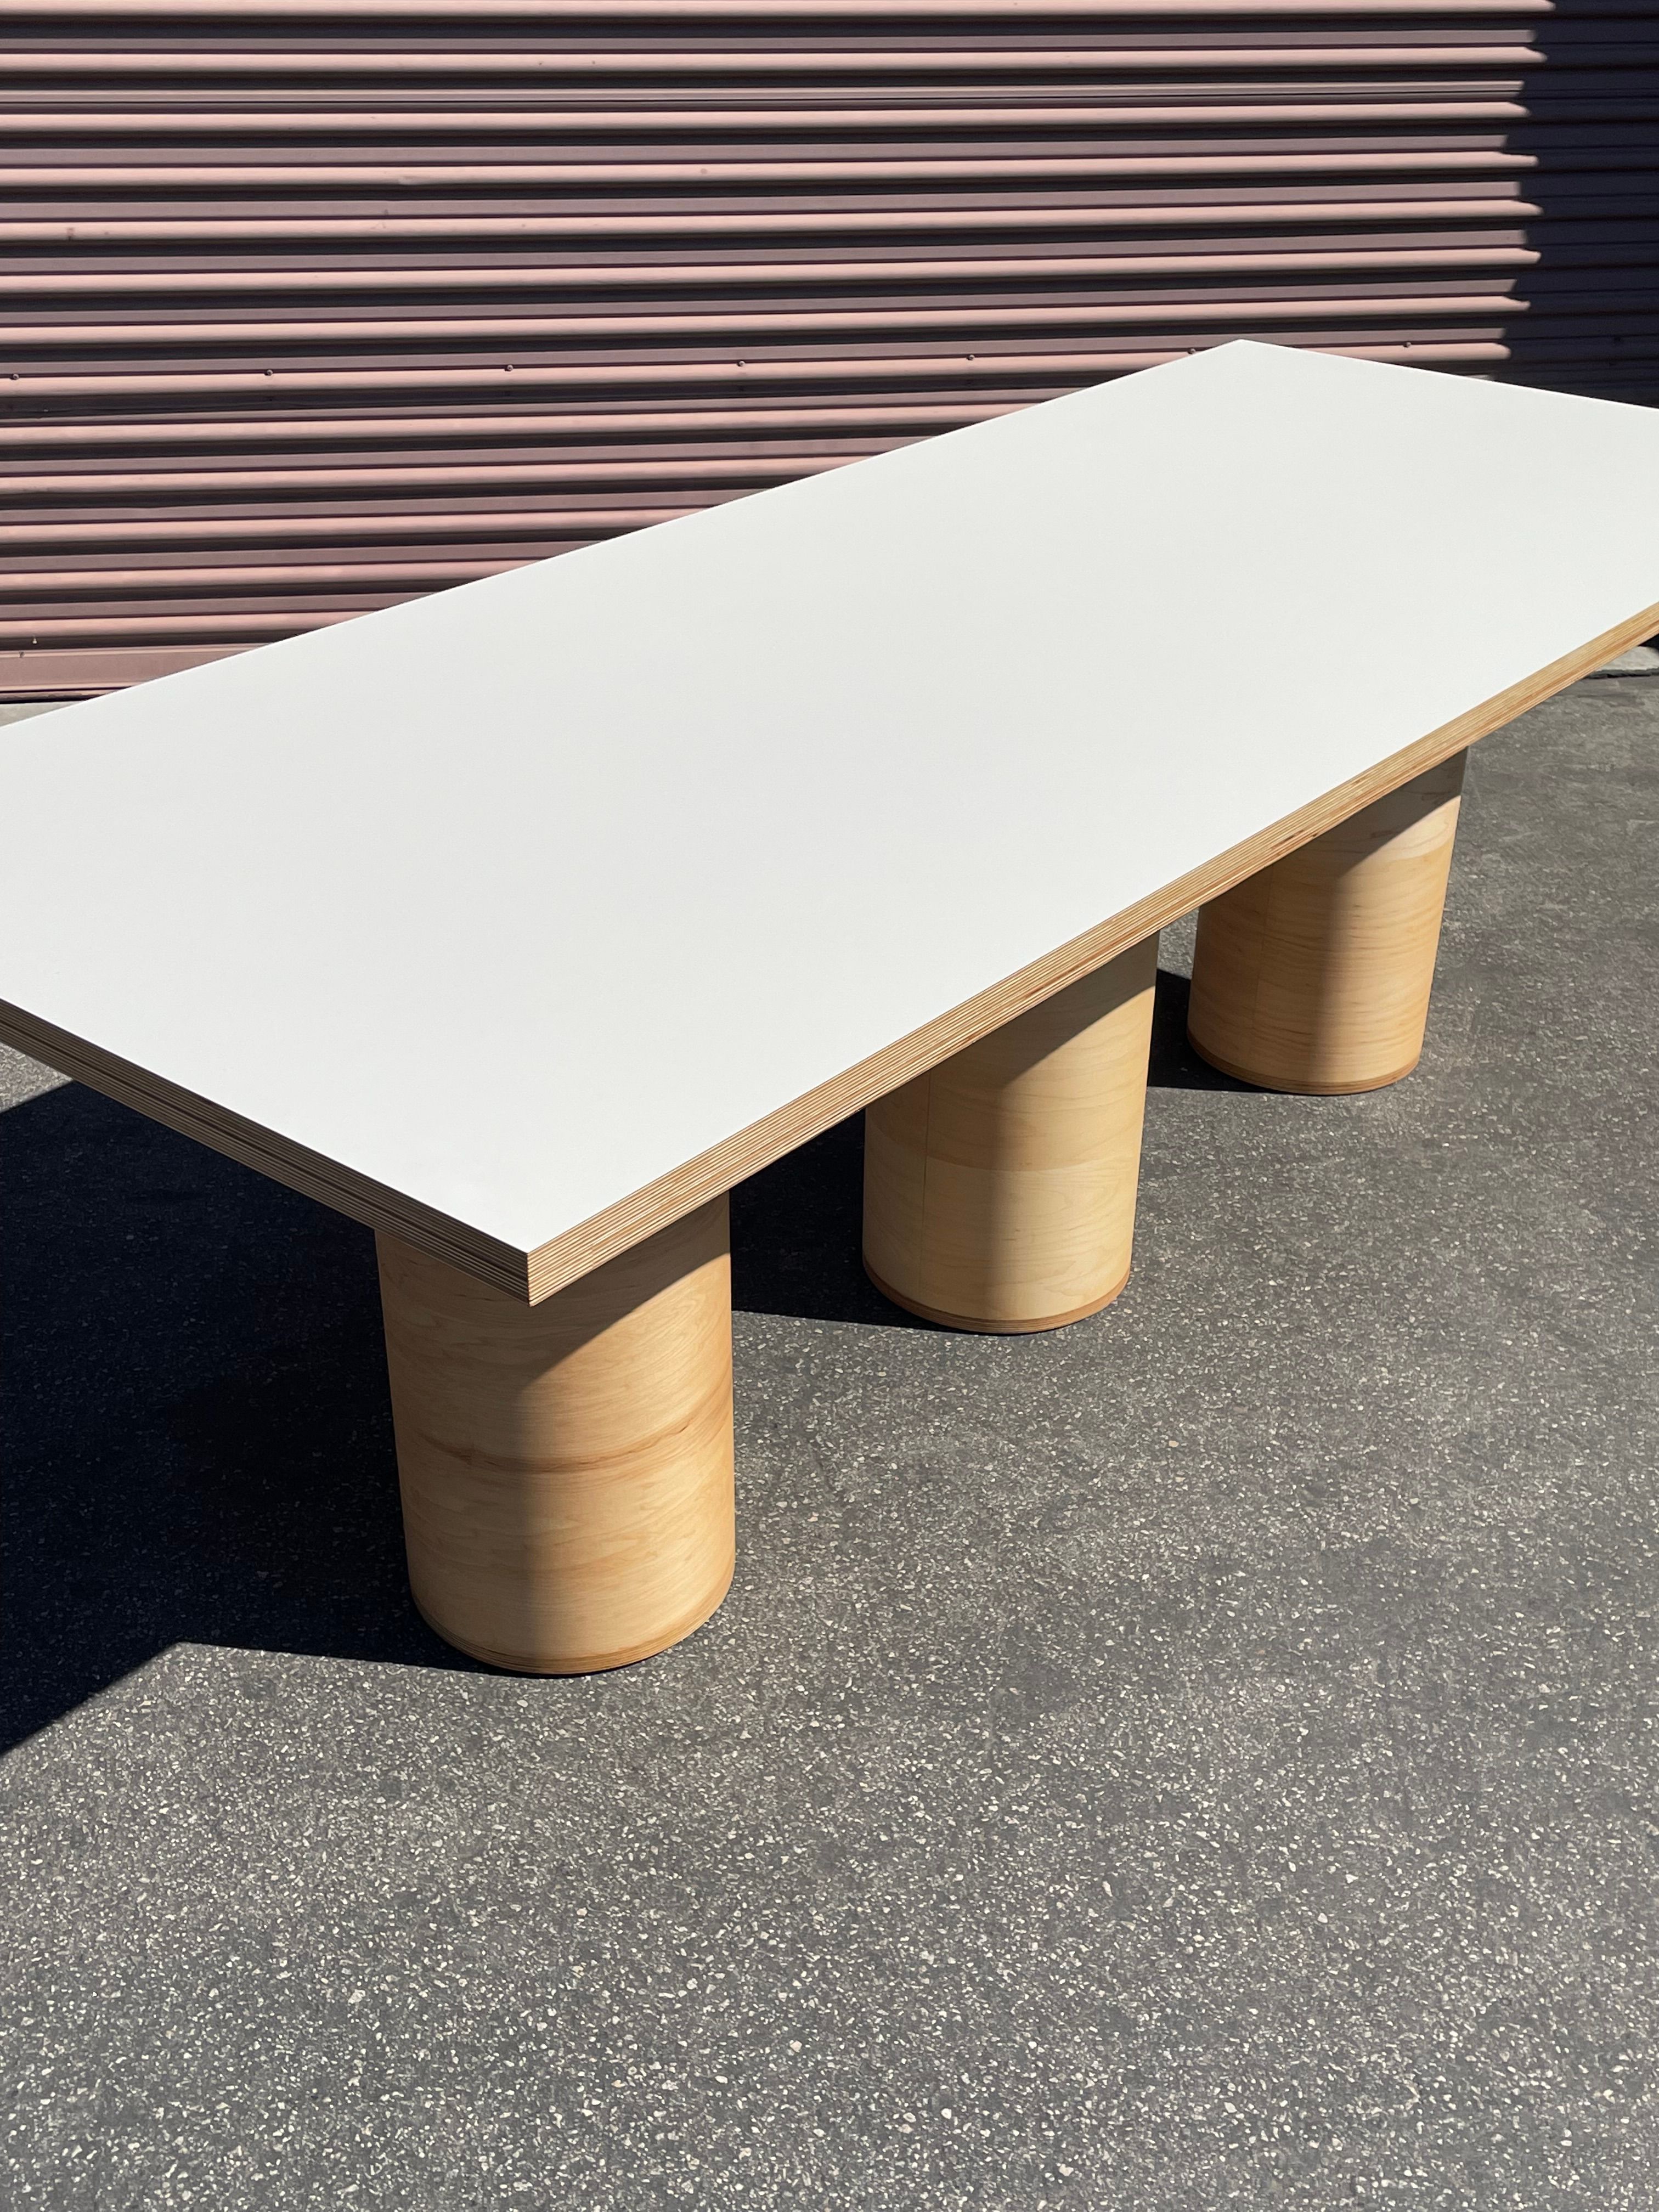  Three Cylinder Rectangle Table product image 1